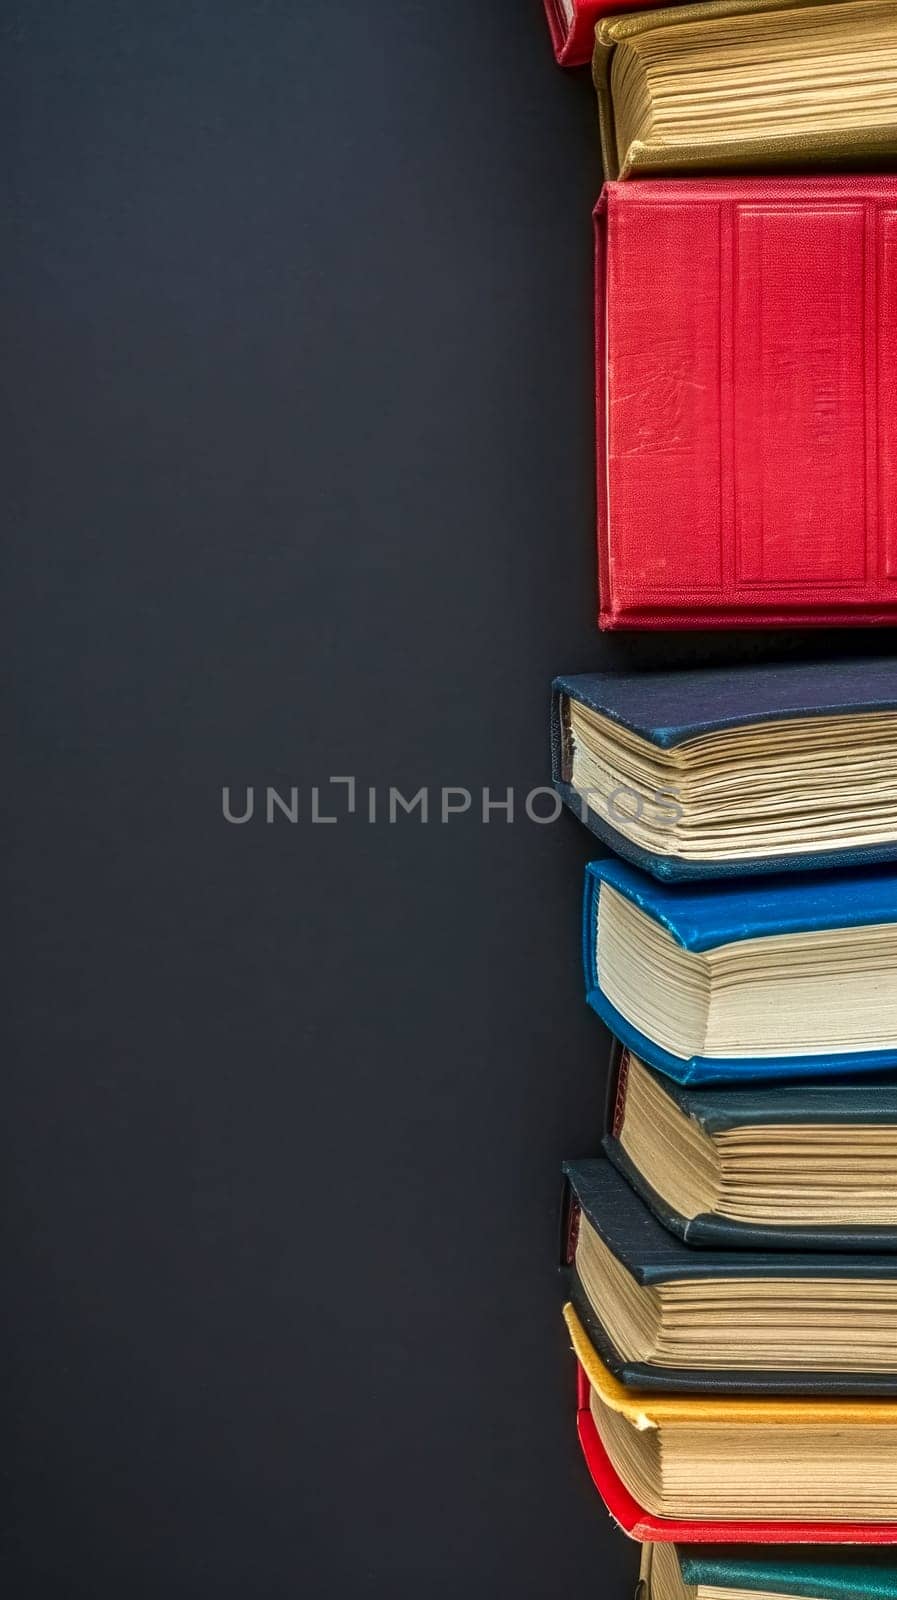 stack of hardcover books in a variety of colors against a dark background, forming a neat, vertical alignment on the left, copy space, design elements, education, literature, and knowledge by Edophoto